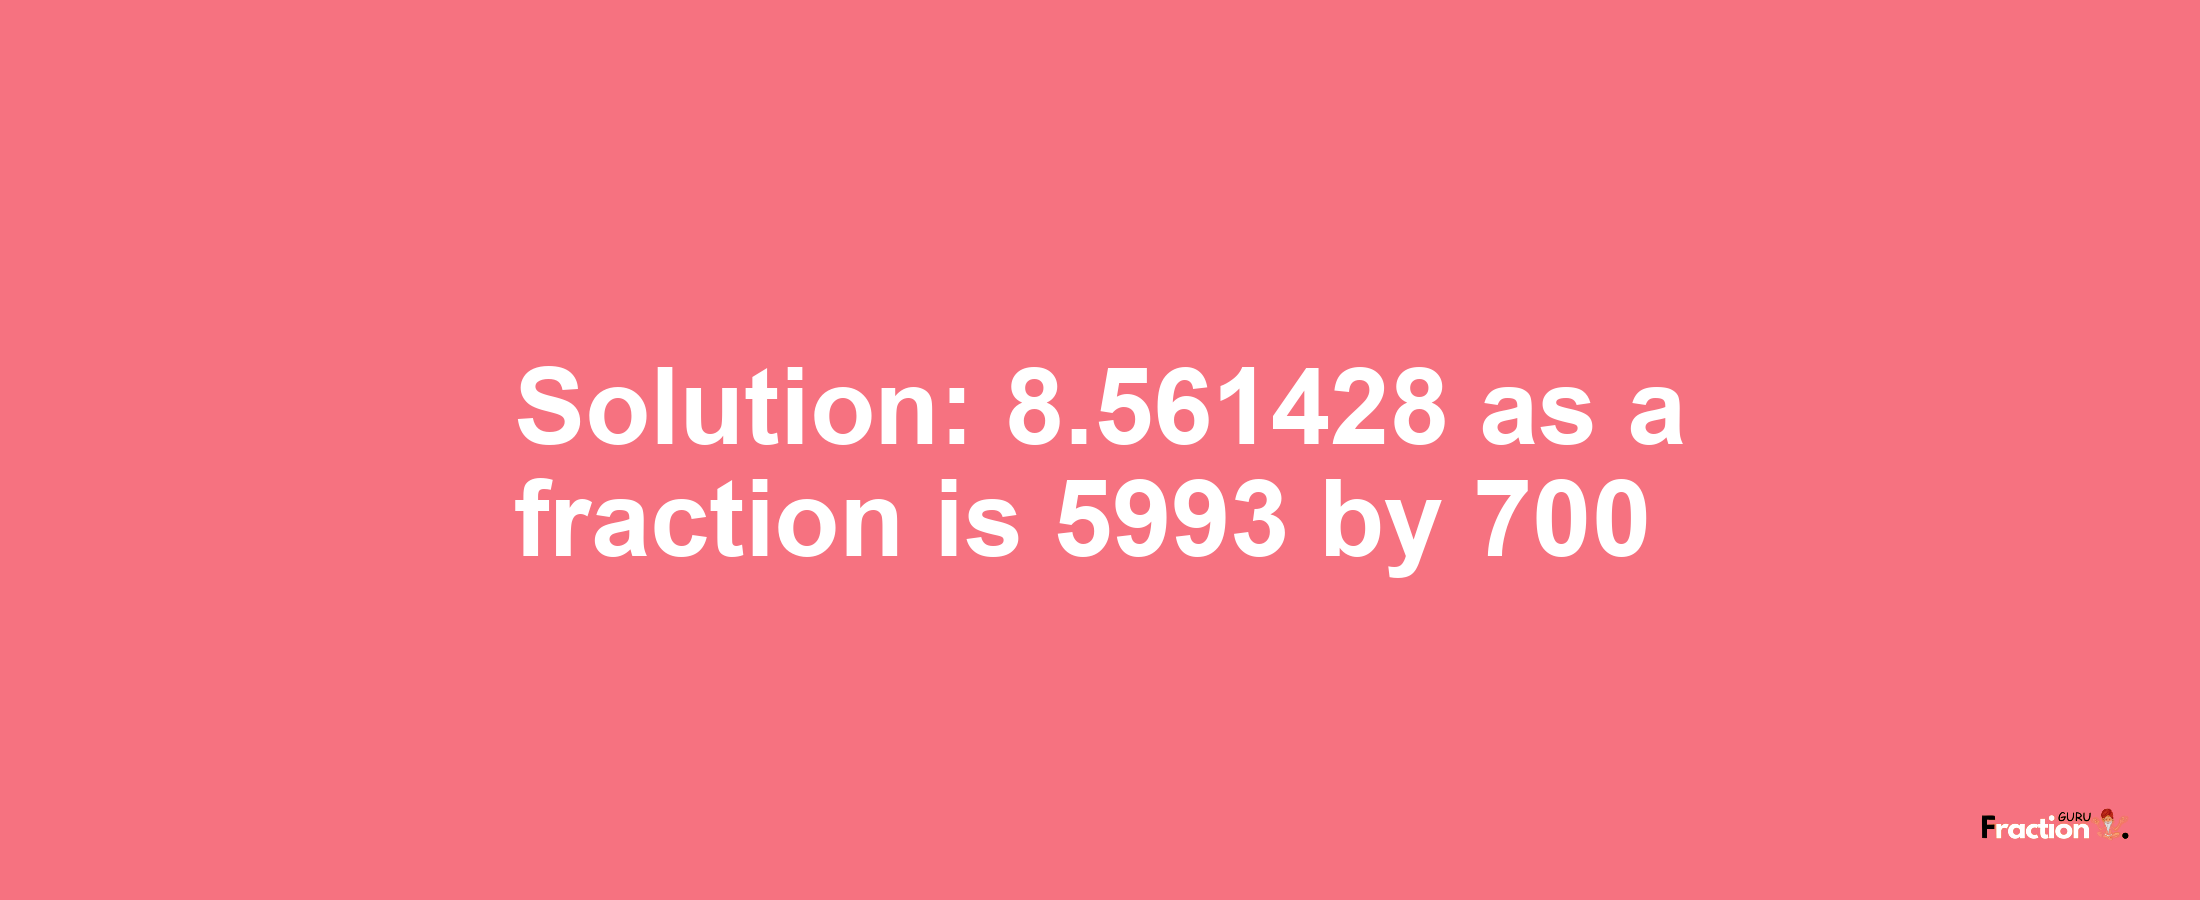 Solution:8.561428 as a fraction is 5993/700